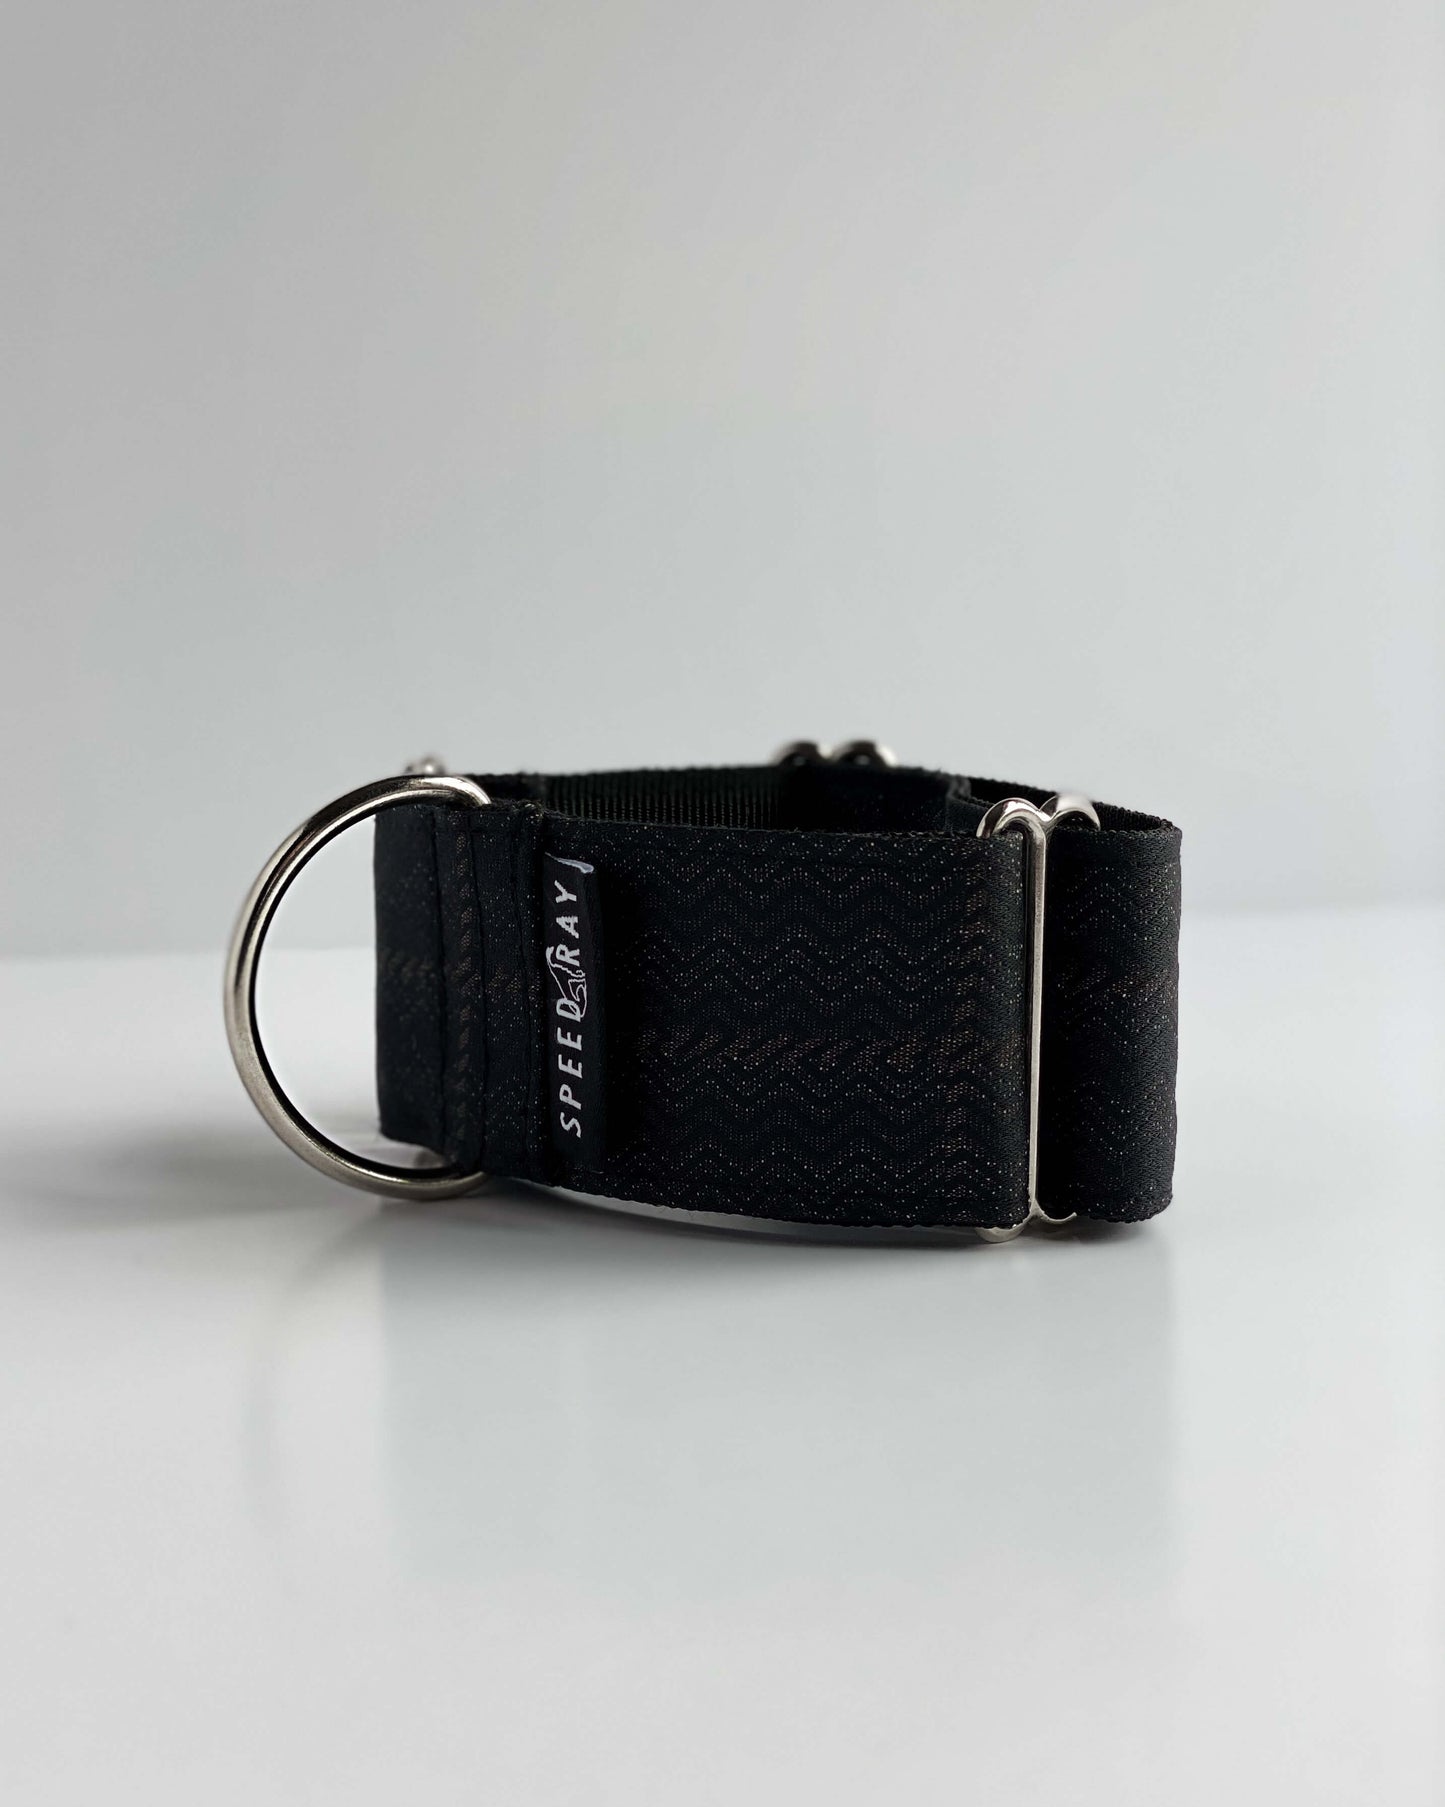 THE IVY Zigzag Black Check Martingale Collar